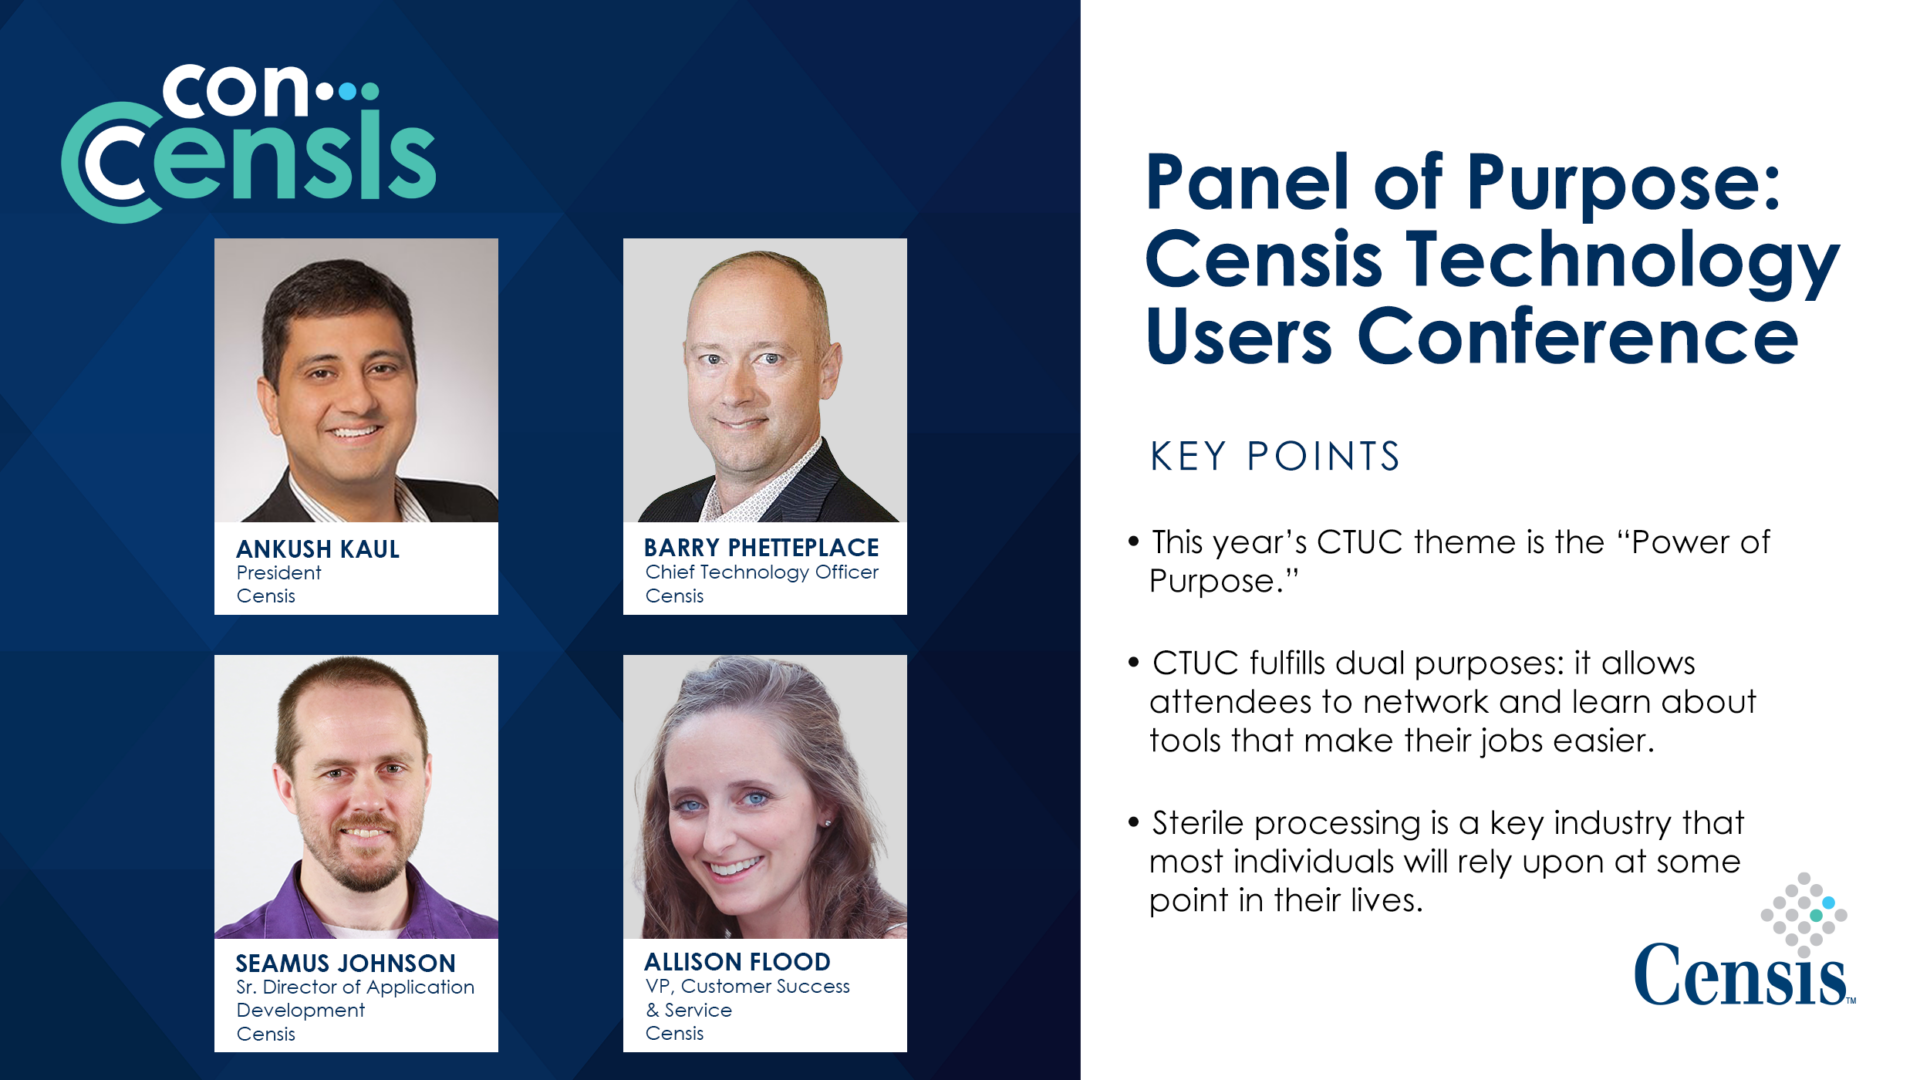 ConCensis Panel of Purpose Censis Technology Users Conference (CTUC